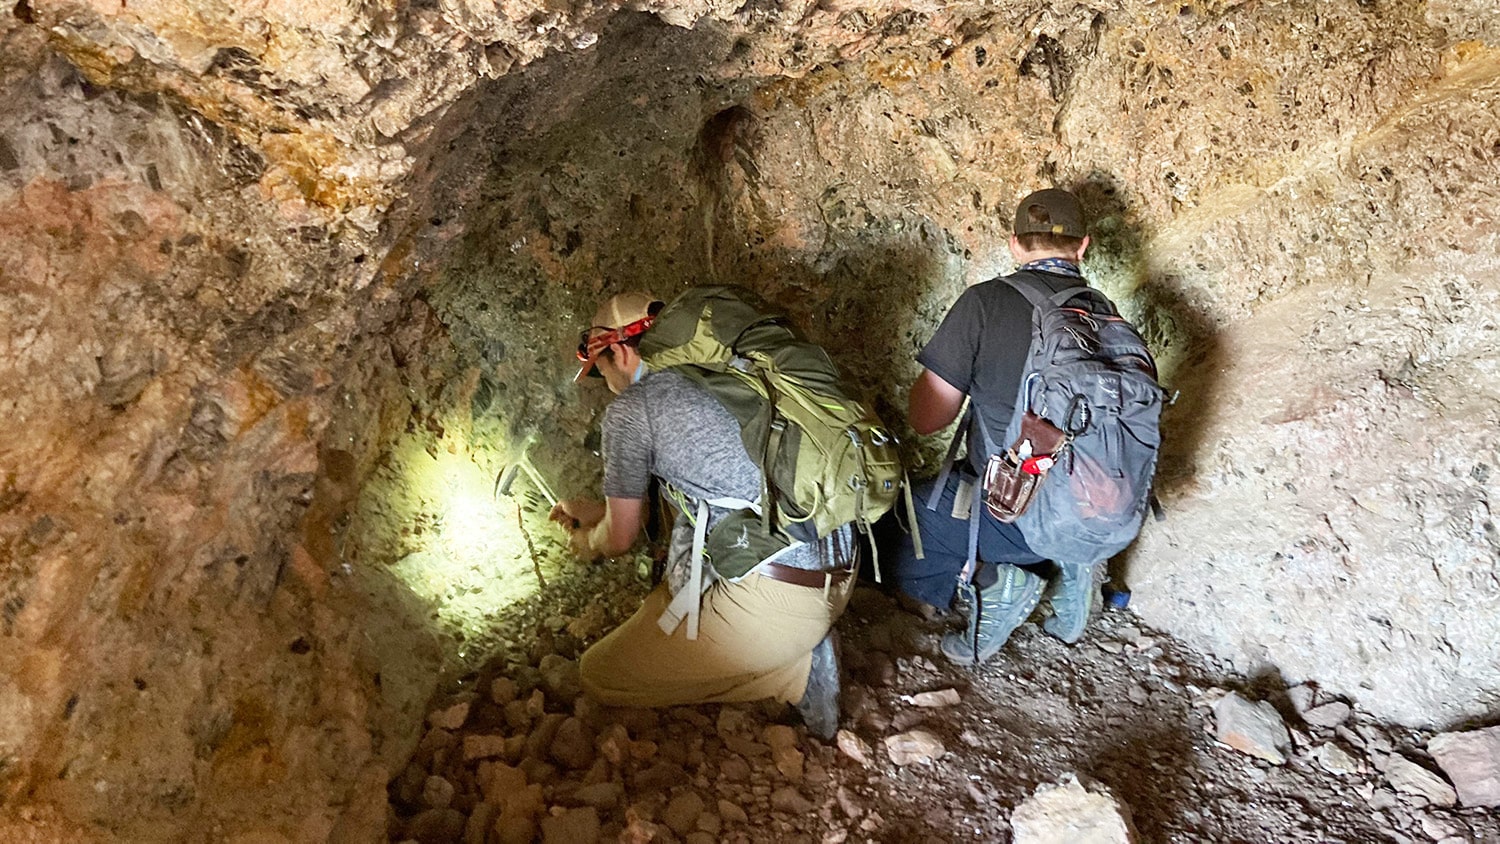 Two MEA465 students explore an inactive mine in New Mexico